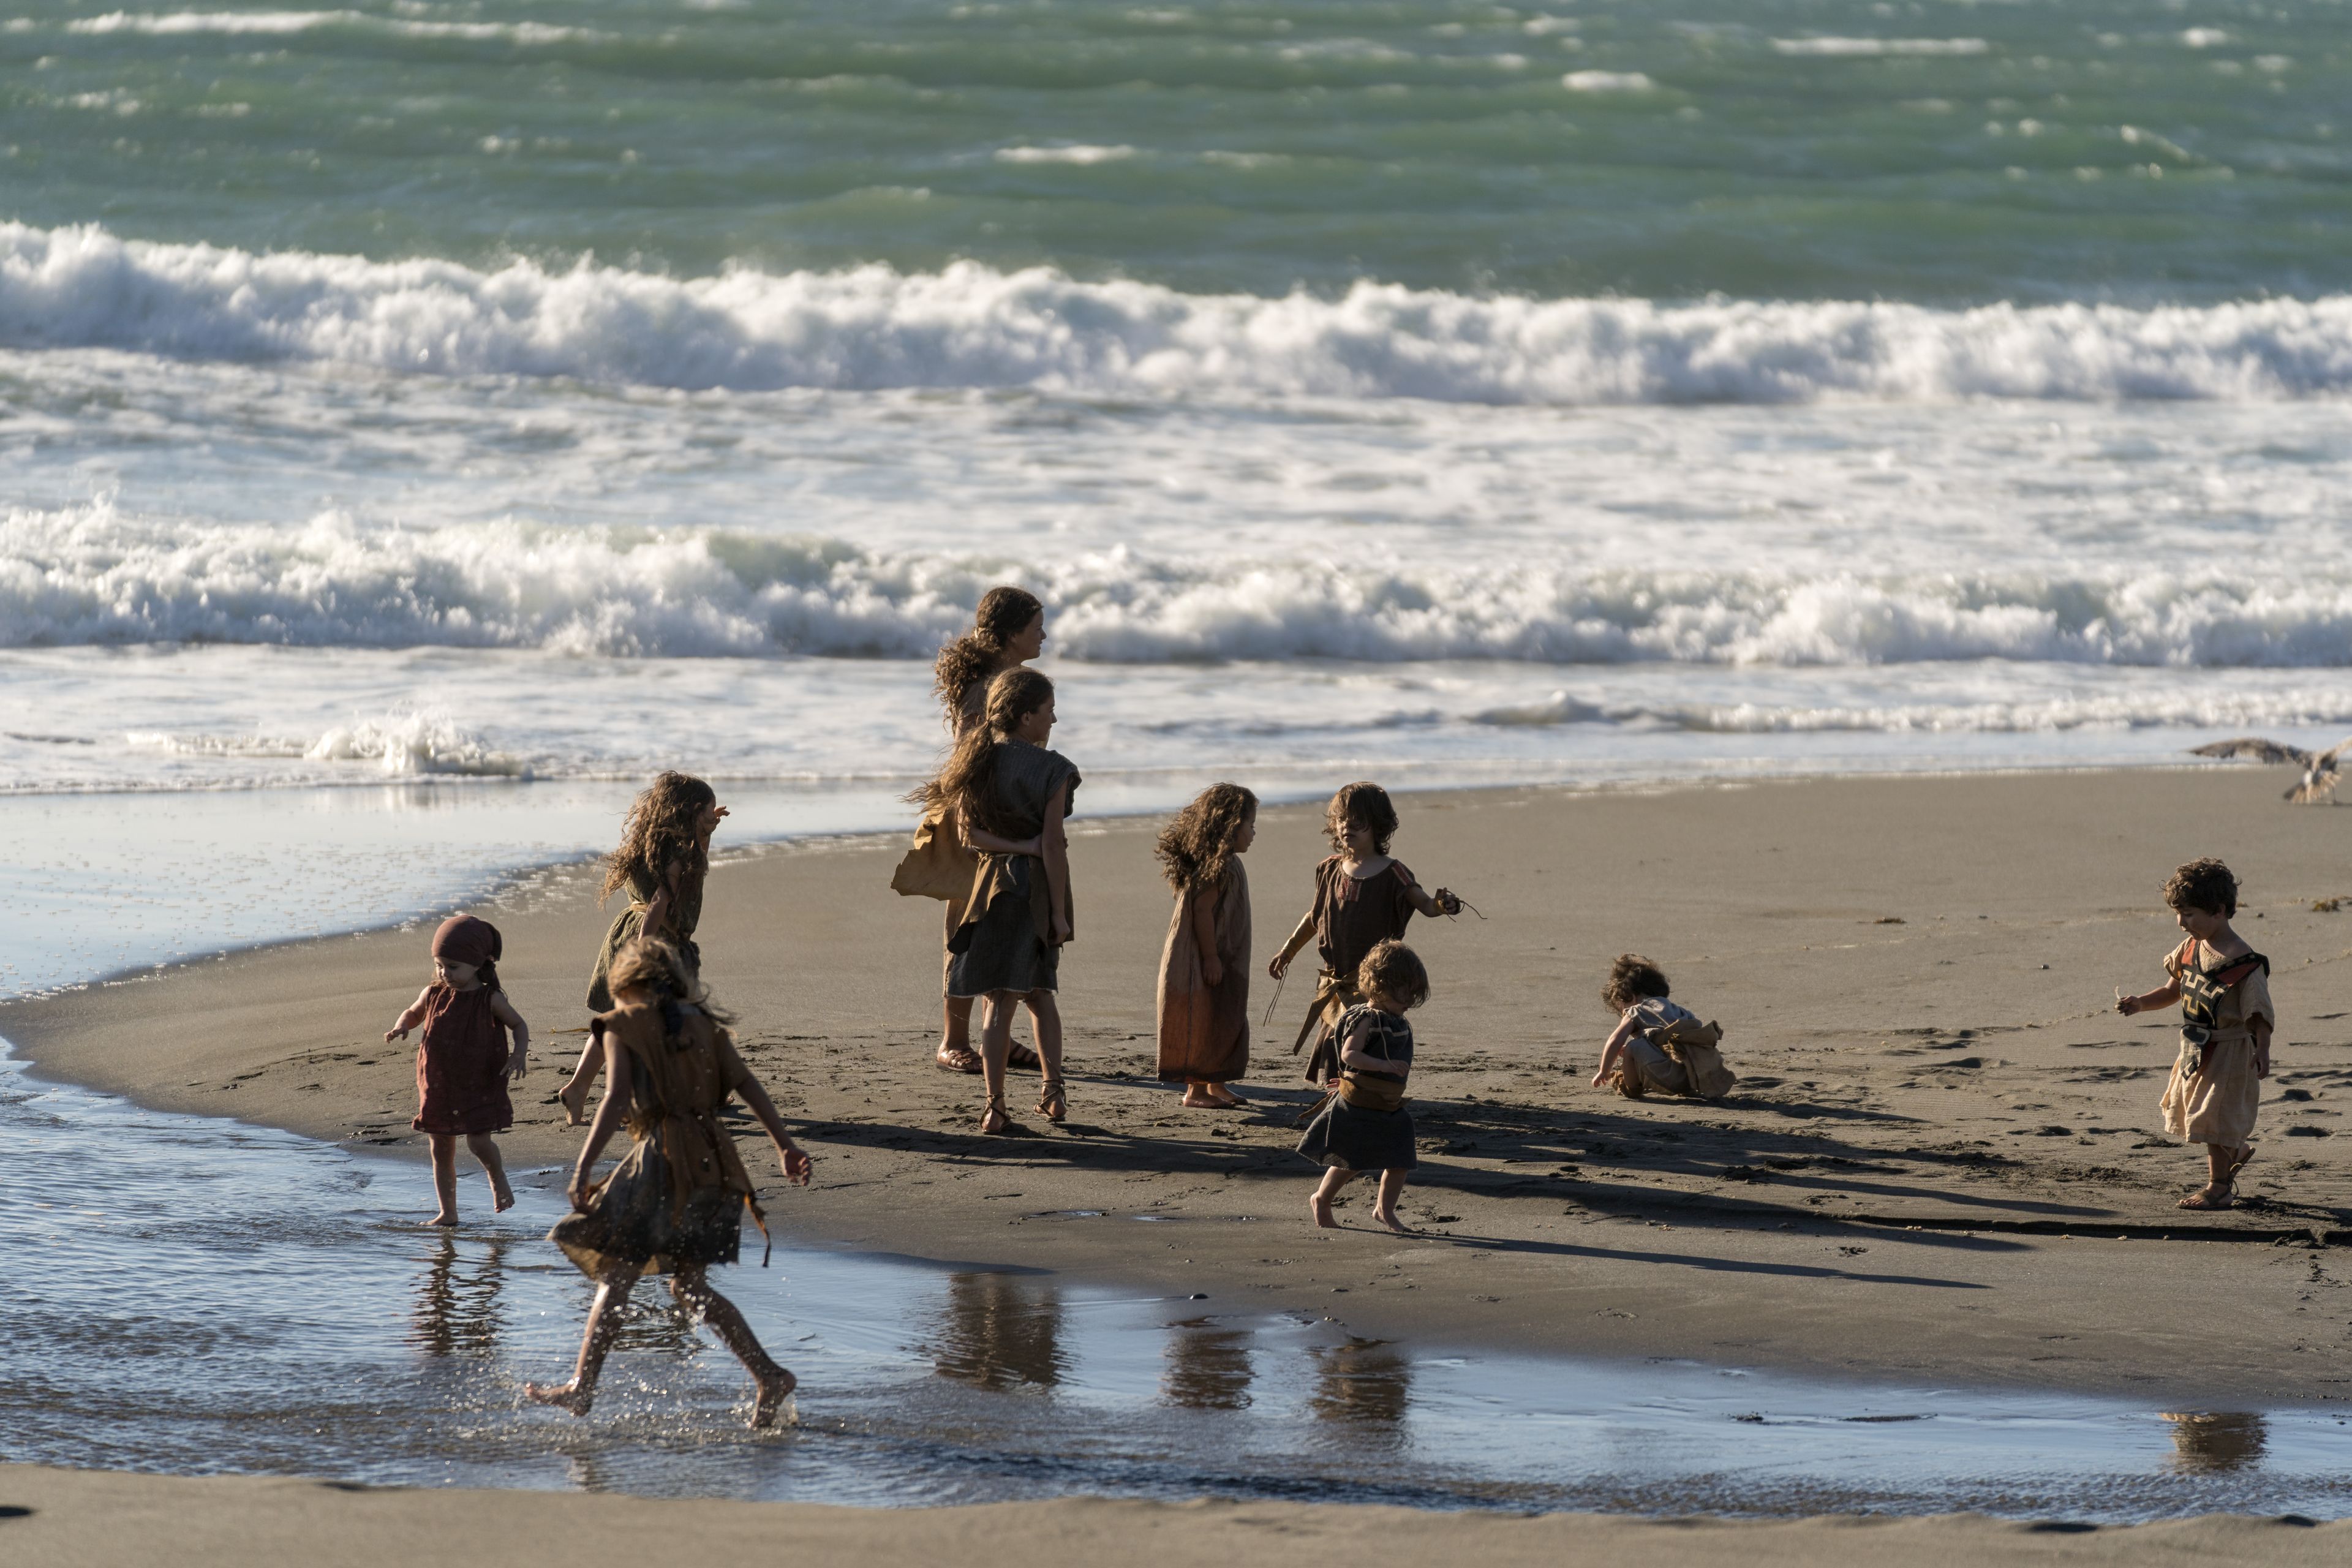 Lehi's family walks on the beach in the land of Bountiful.